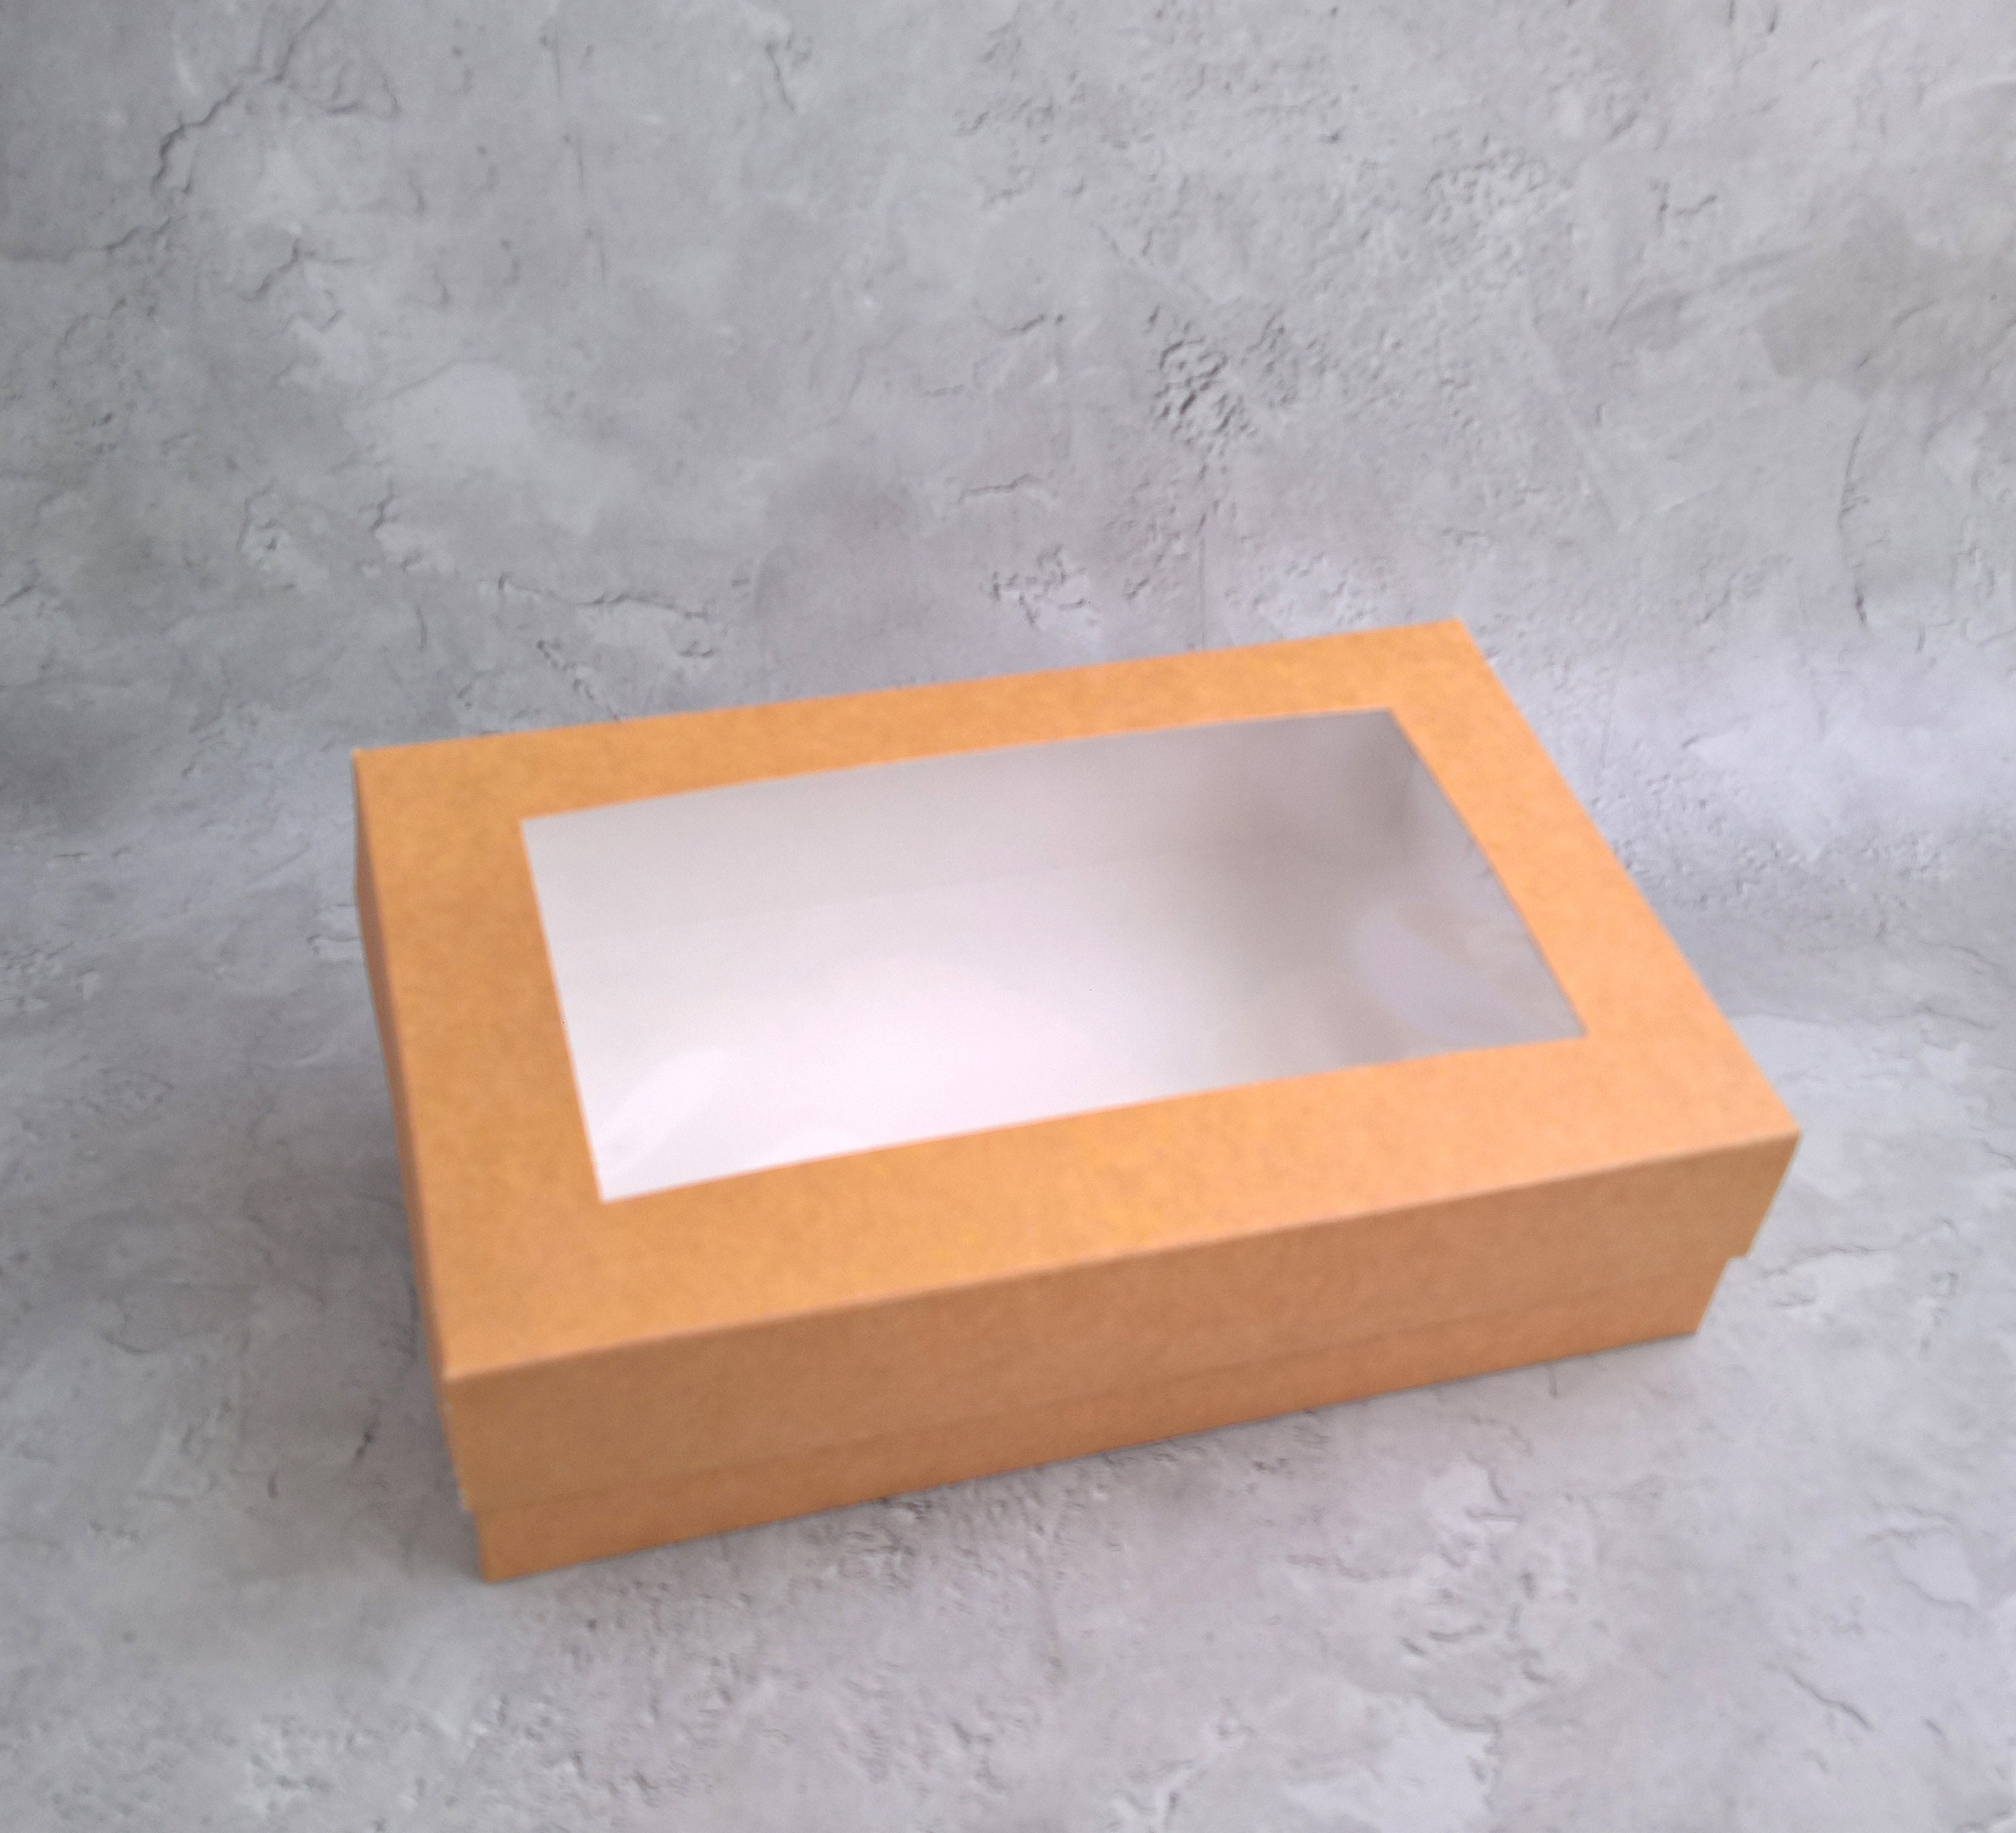 5 Flat Kraft Paper Box Bases + Clear Sleeves; 4 1/2 x 1 x 6 Inch Boxes